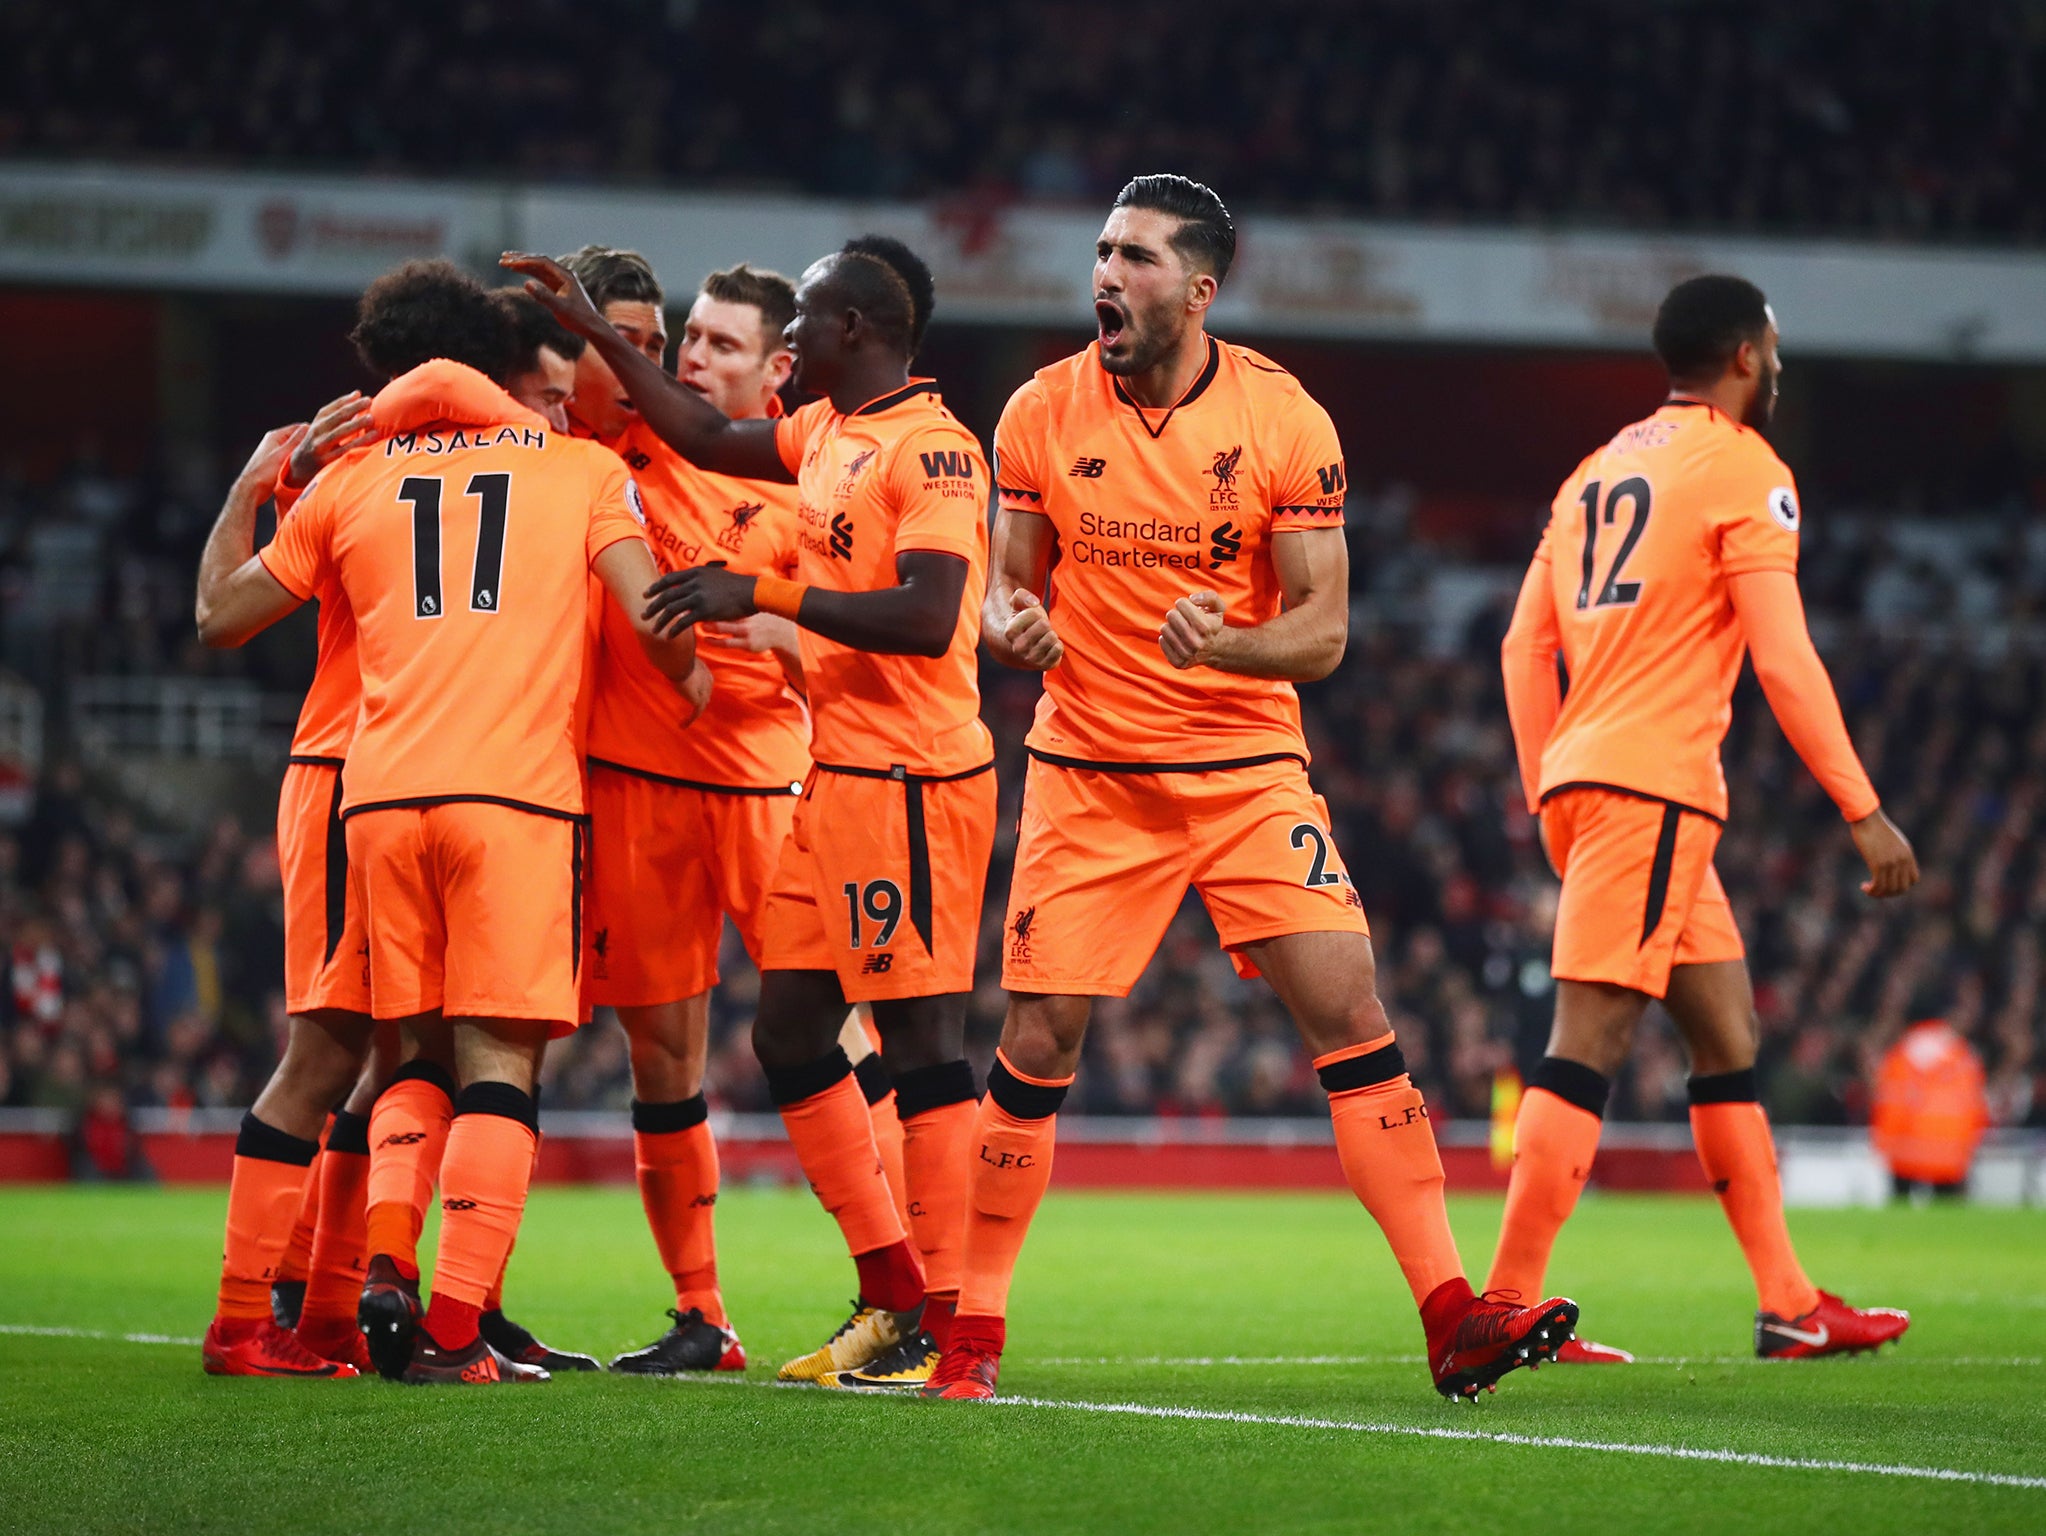 Liverpool remain one point above Arsenal in the Premier League table